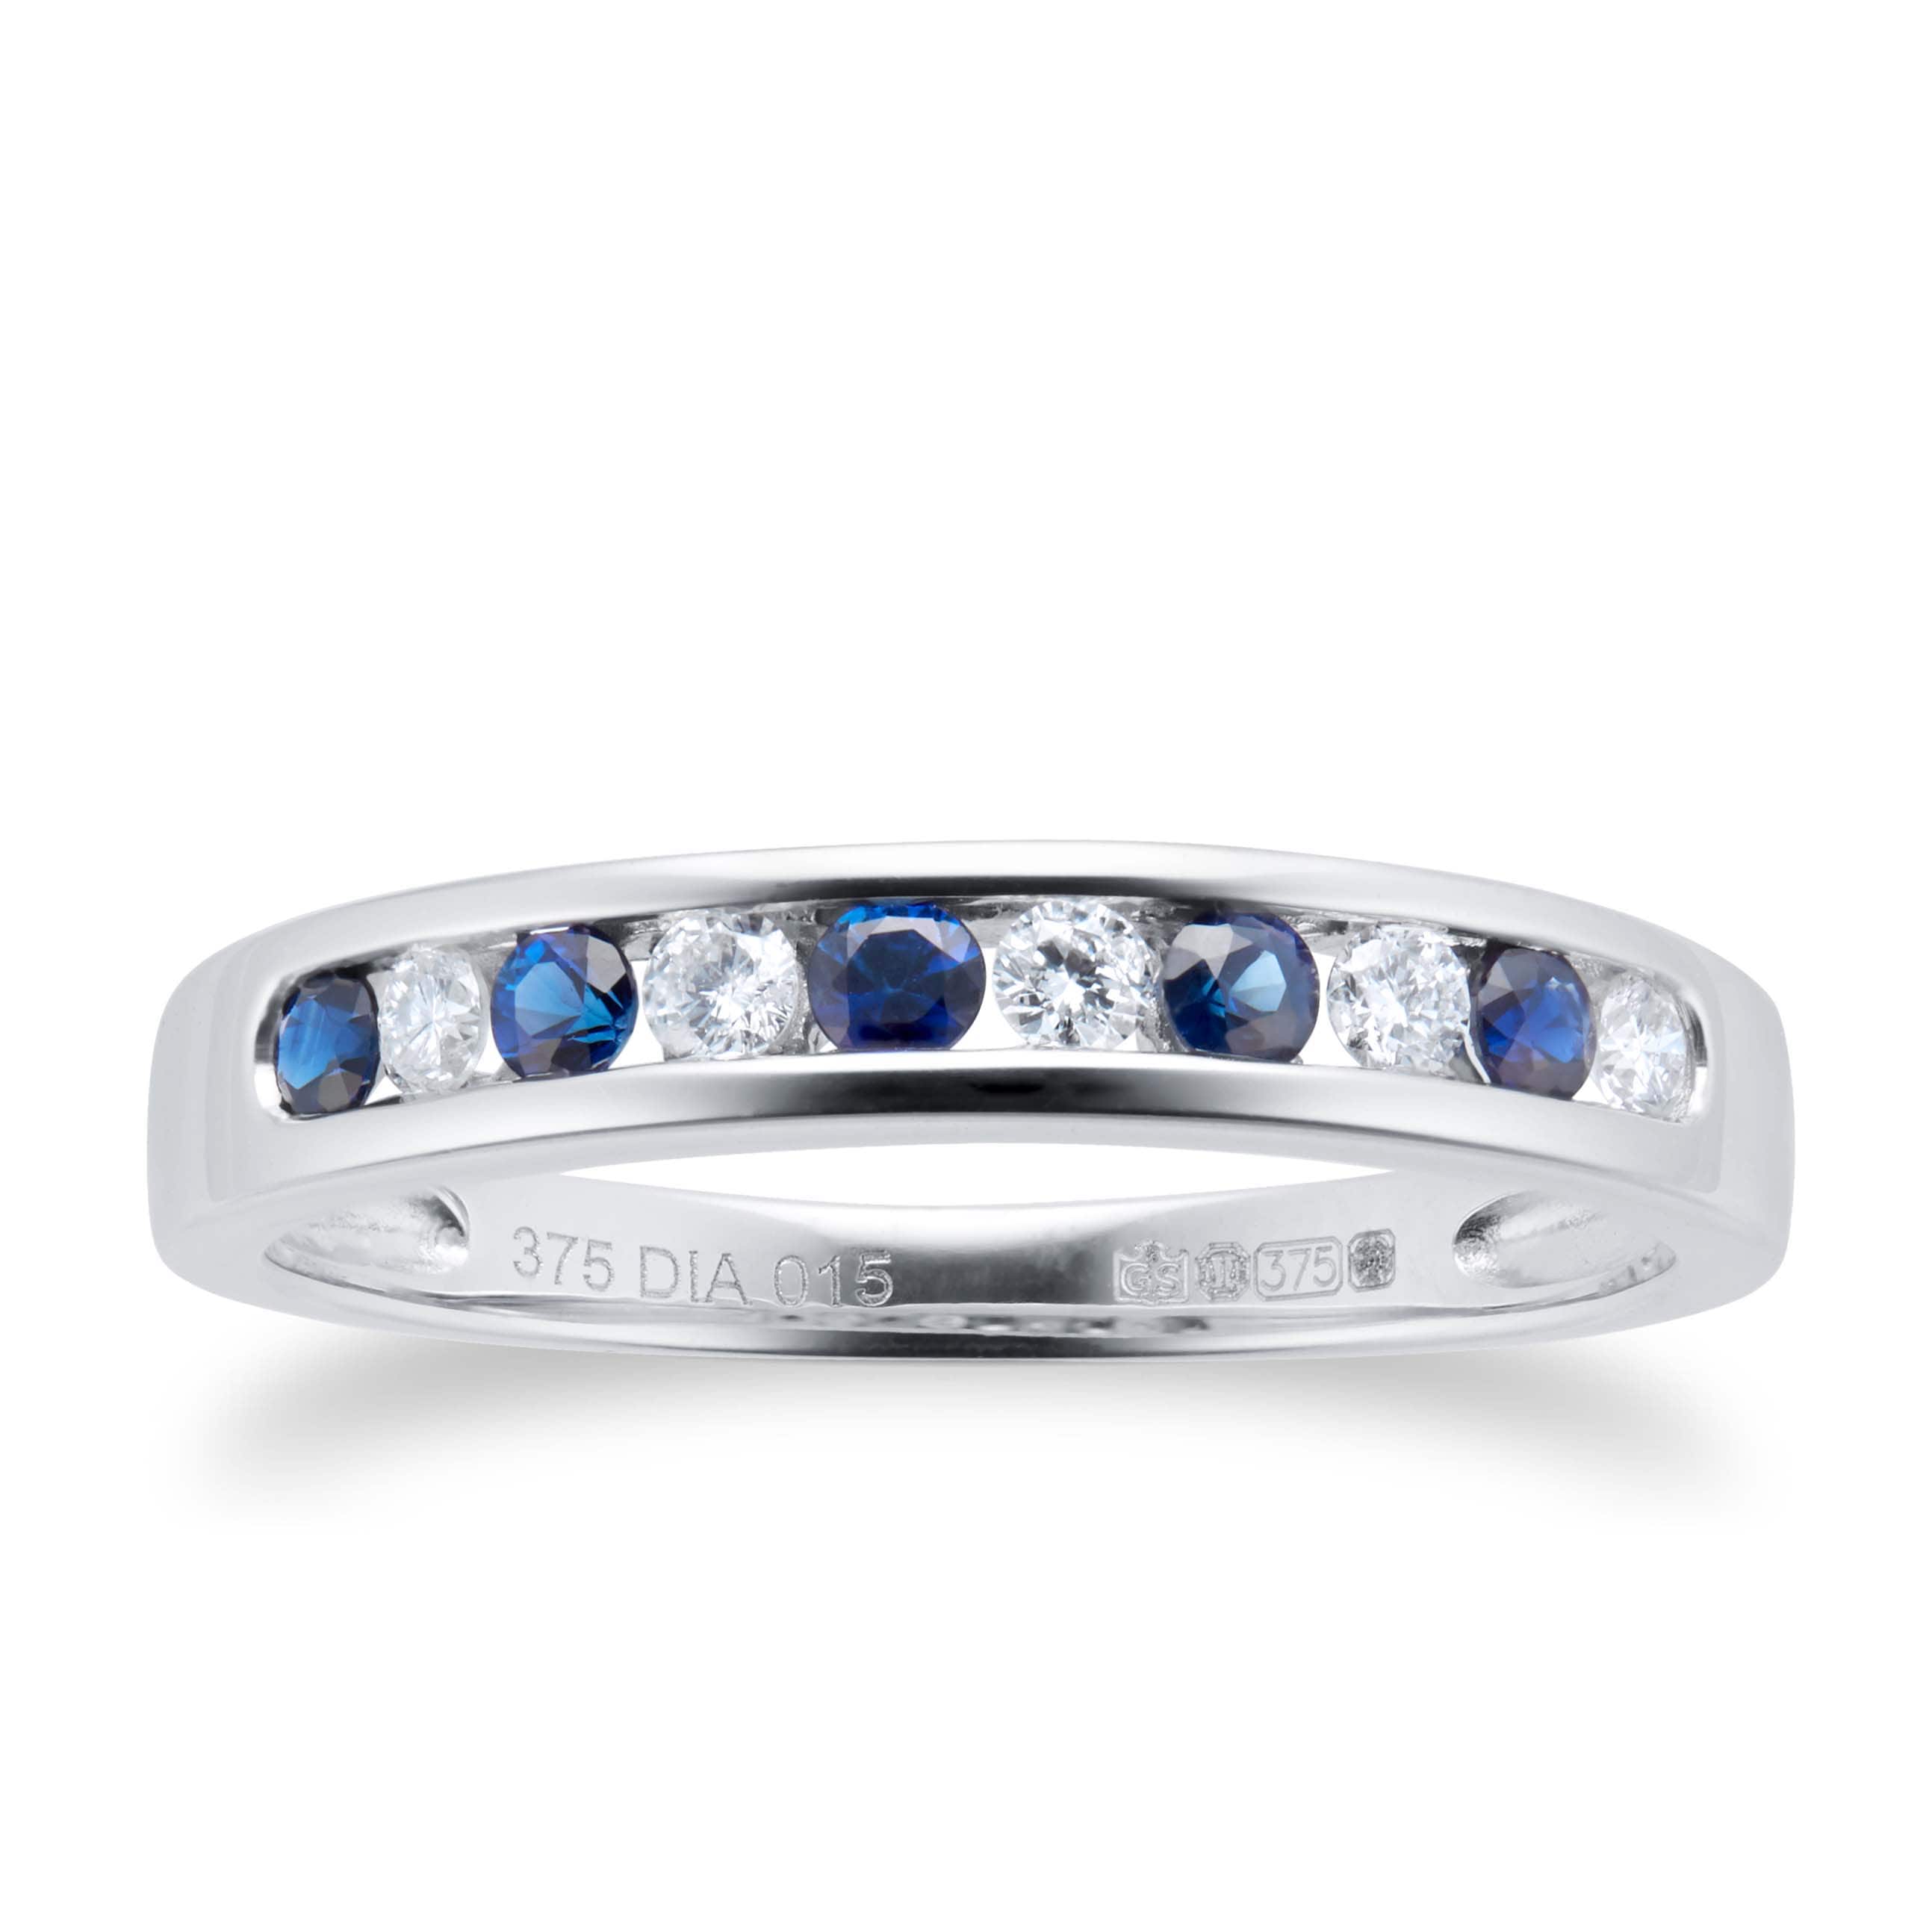 Brilliant Cut Sapphire And Diamond Eternity Ring In 9 Carat White Gold - Ring Size J